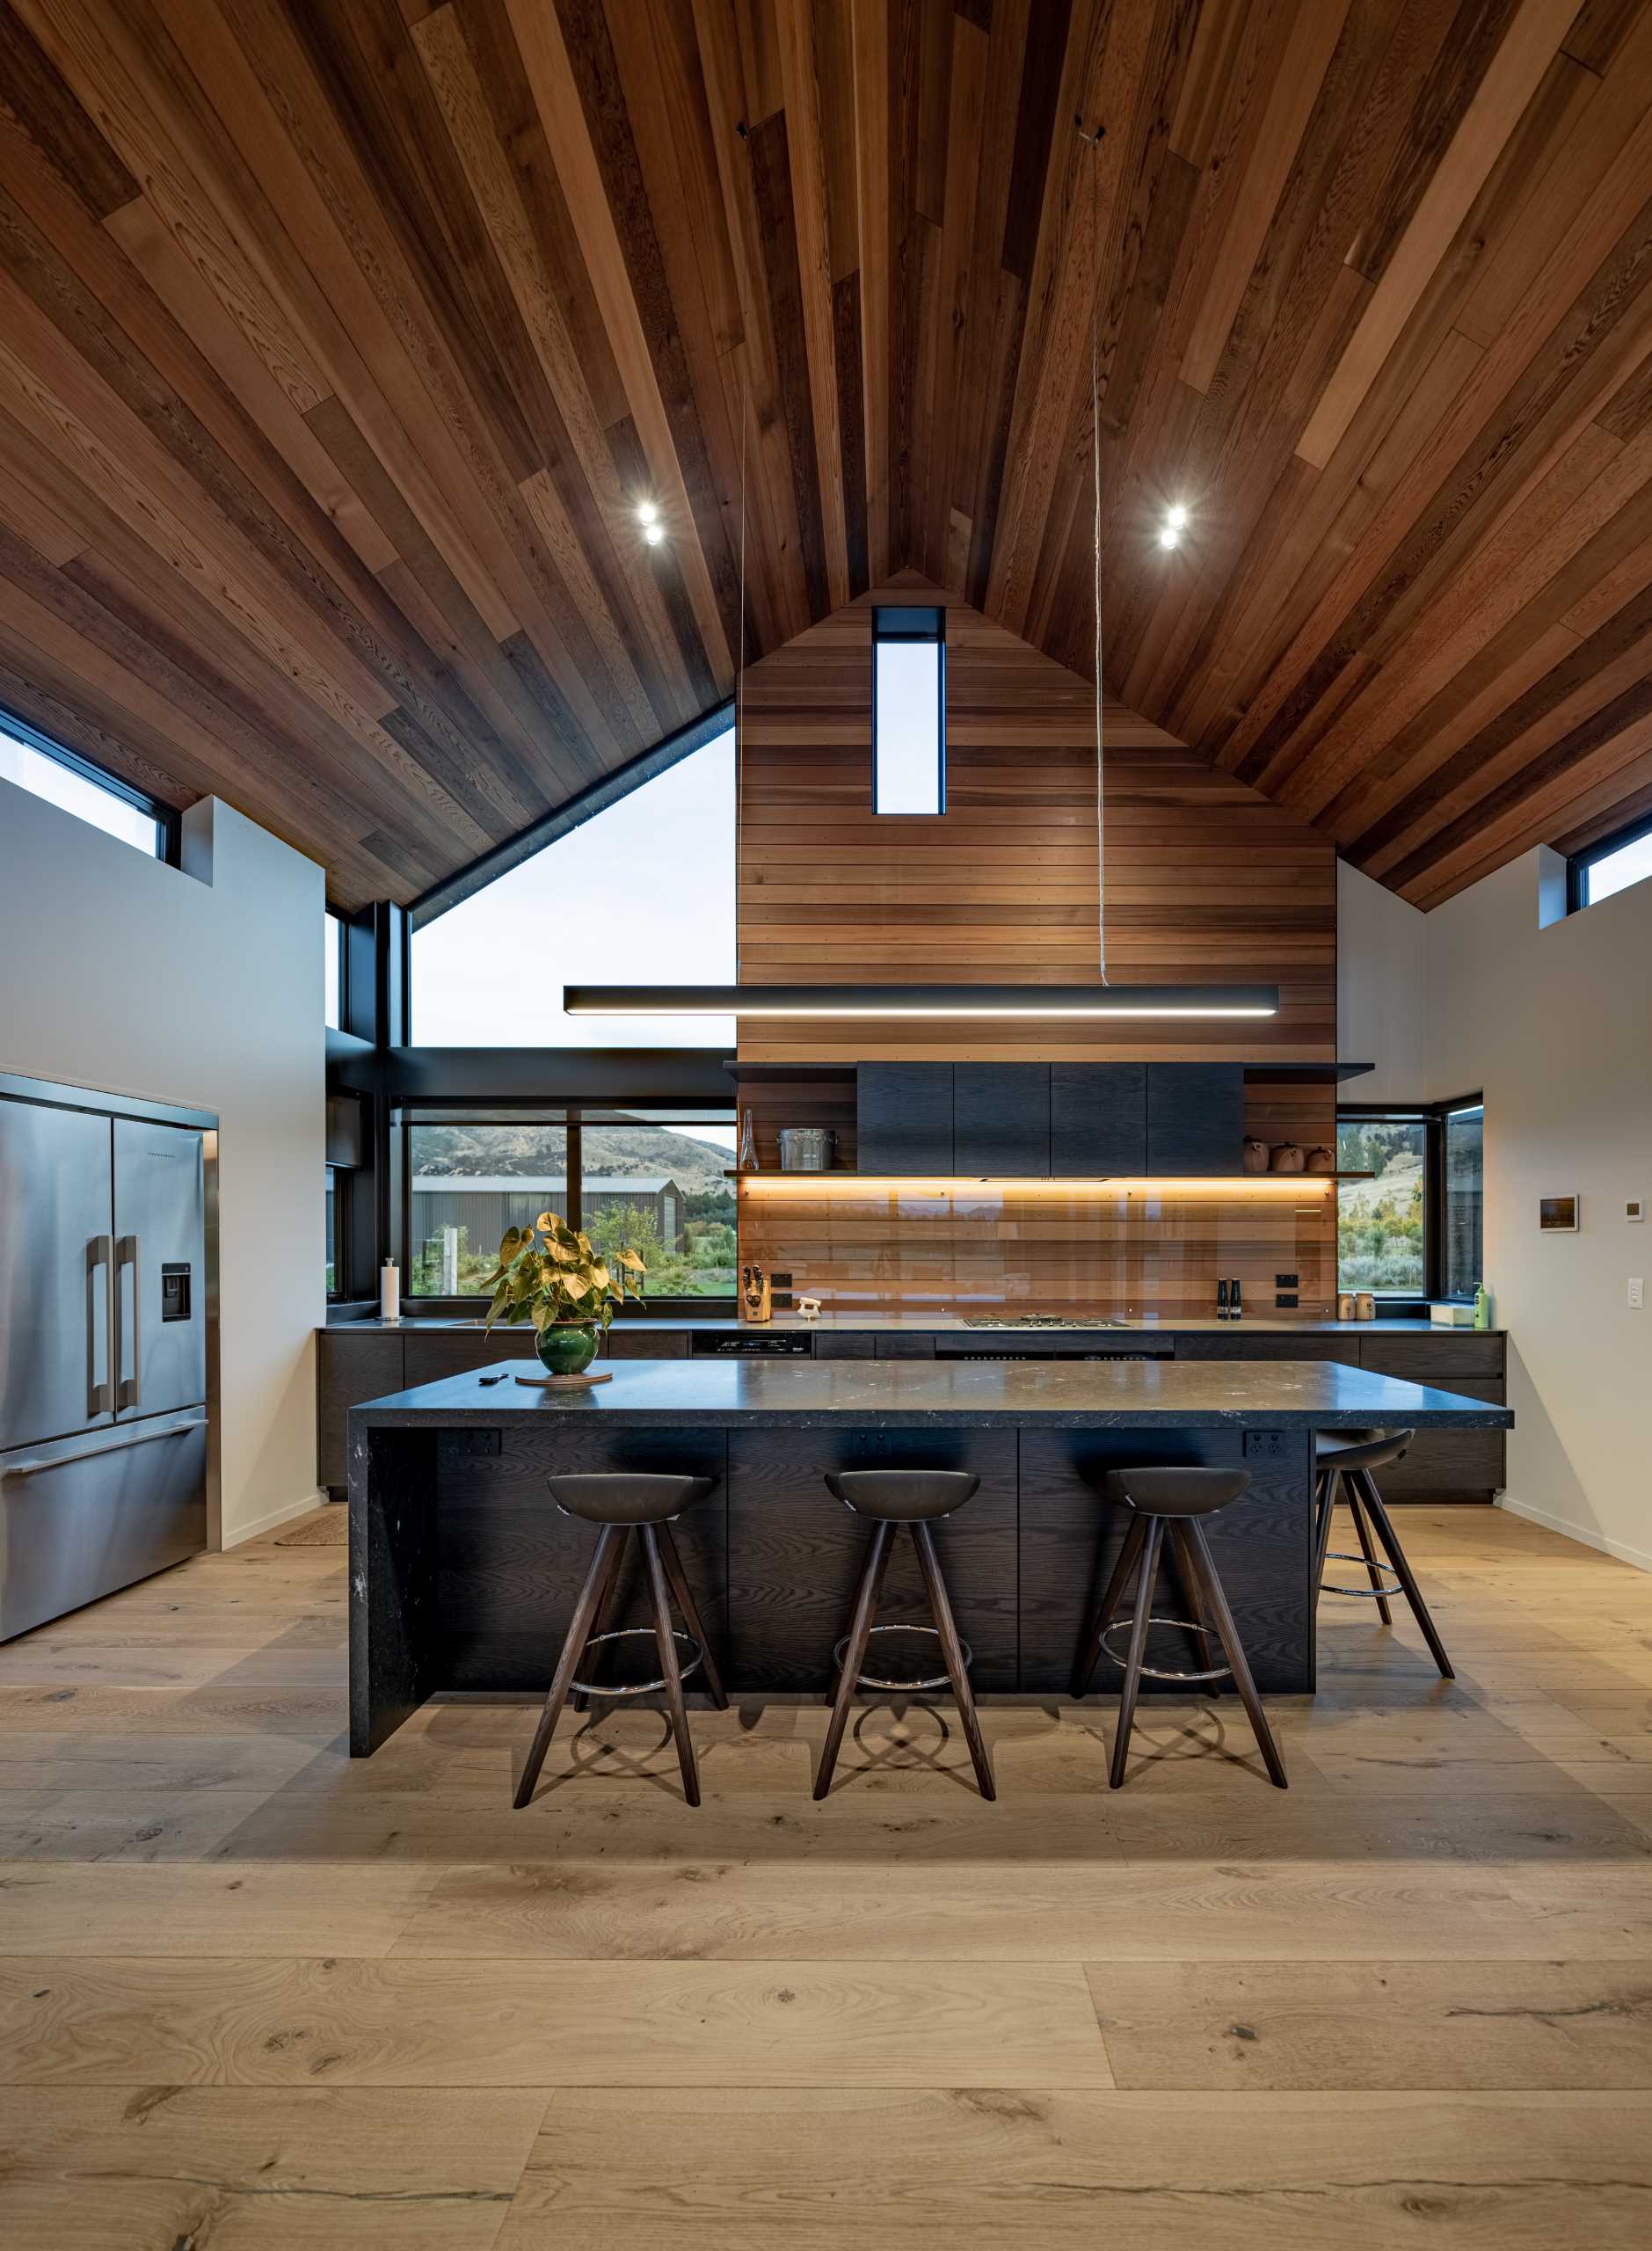 In this modern kitchen, the dark cabinets contrast the wood on the ceiling and walls, while a glass backsplash protects the wood, and hidden lighting highlights it.